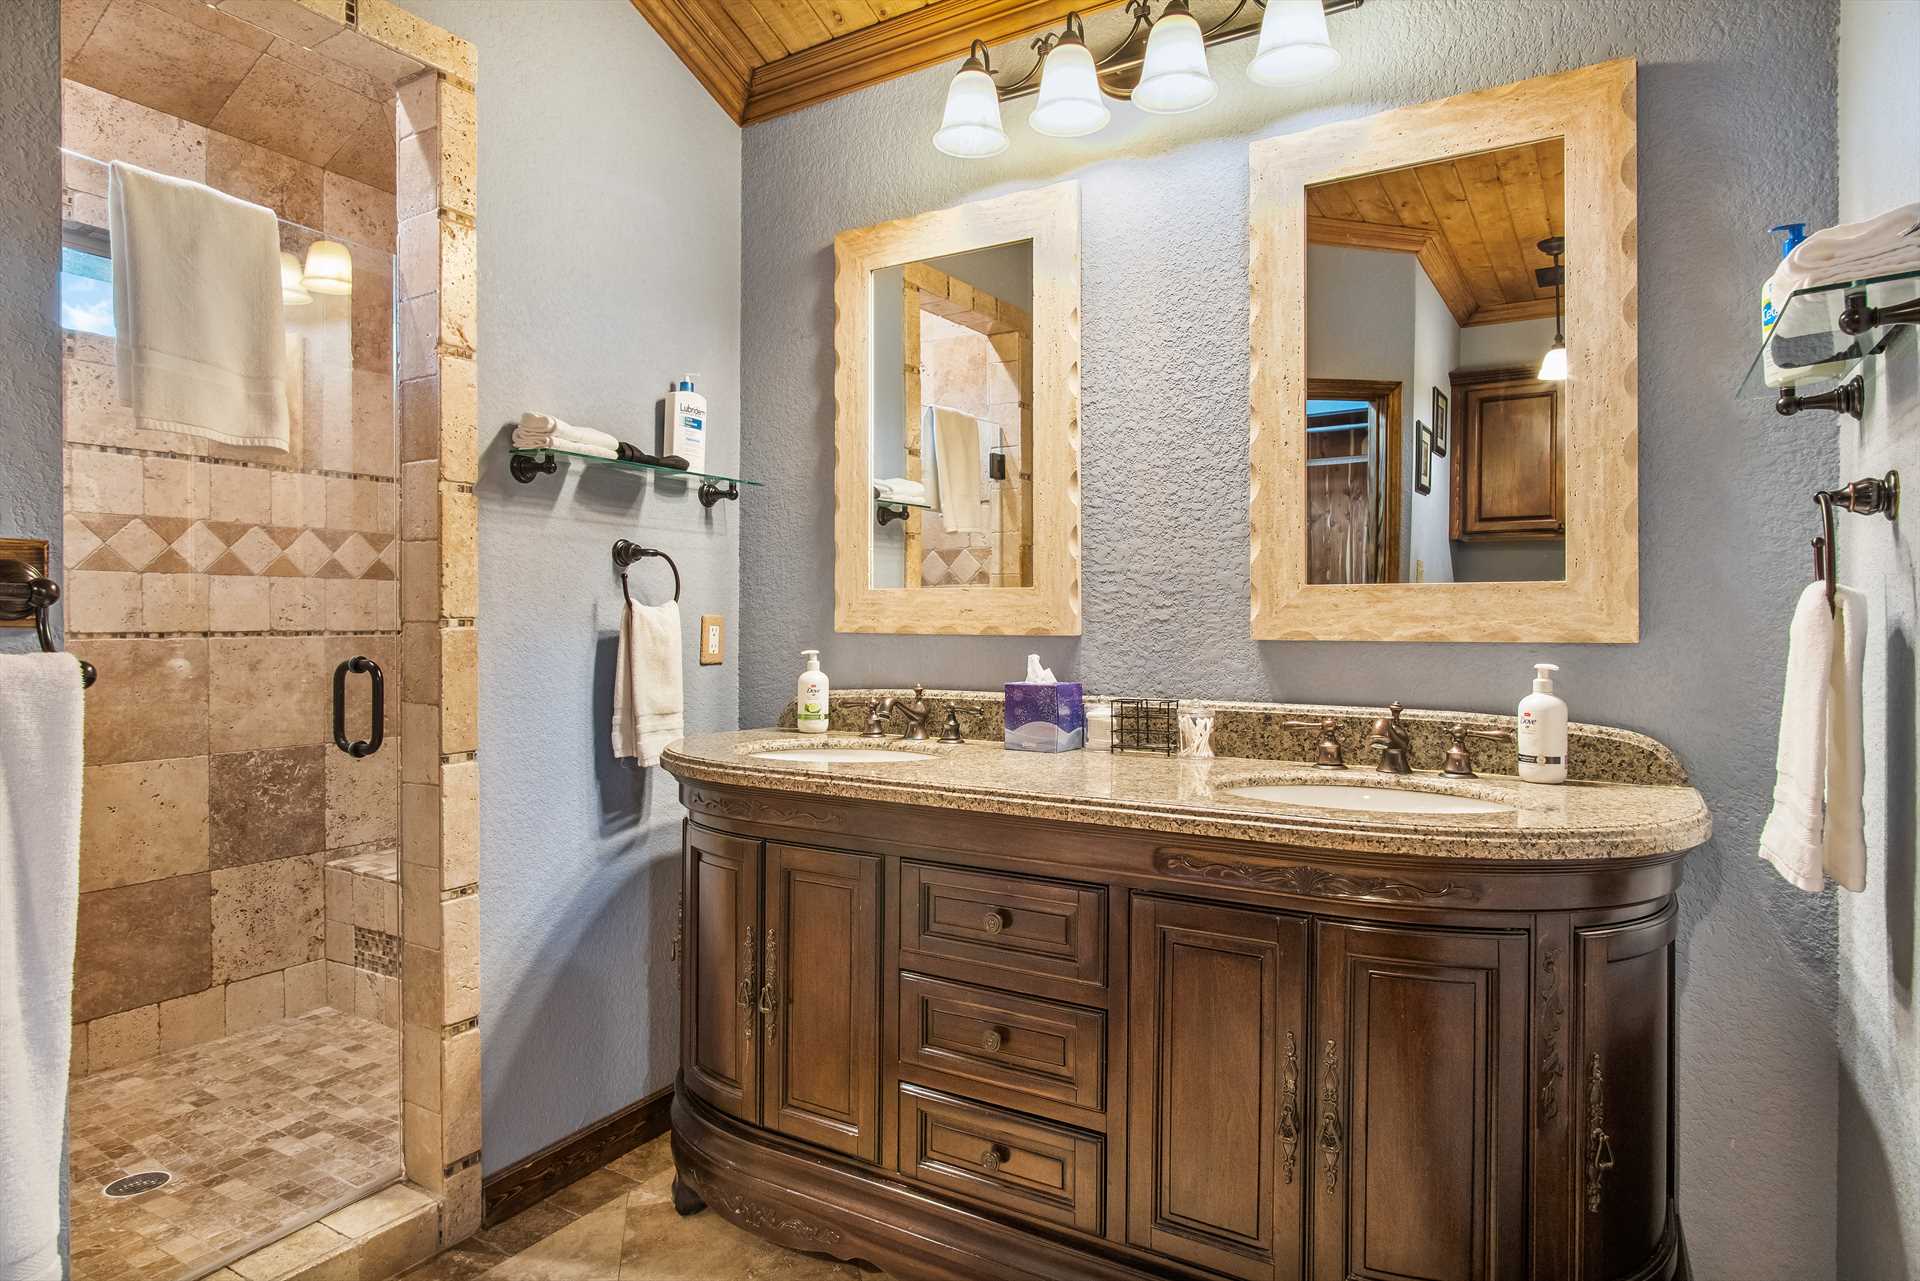                                                 When it comes time to get yourself clean, you'll find all the bath spaces at the Retreat are spotlessly clean, too!